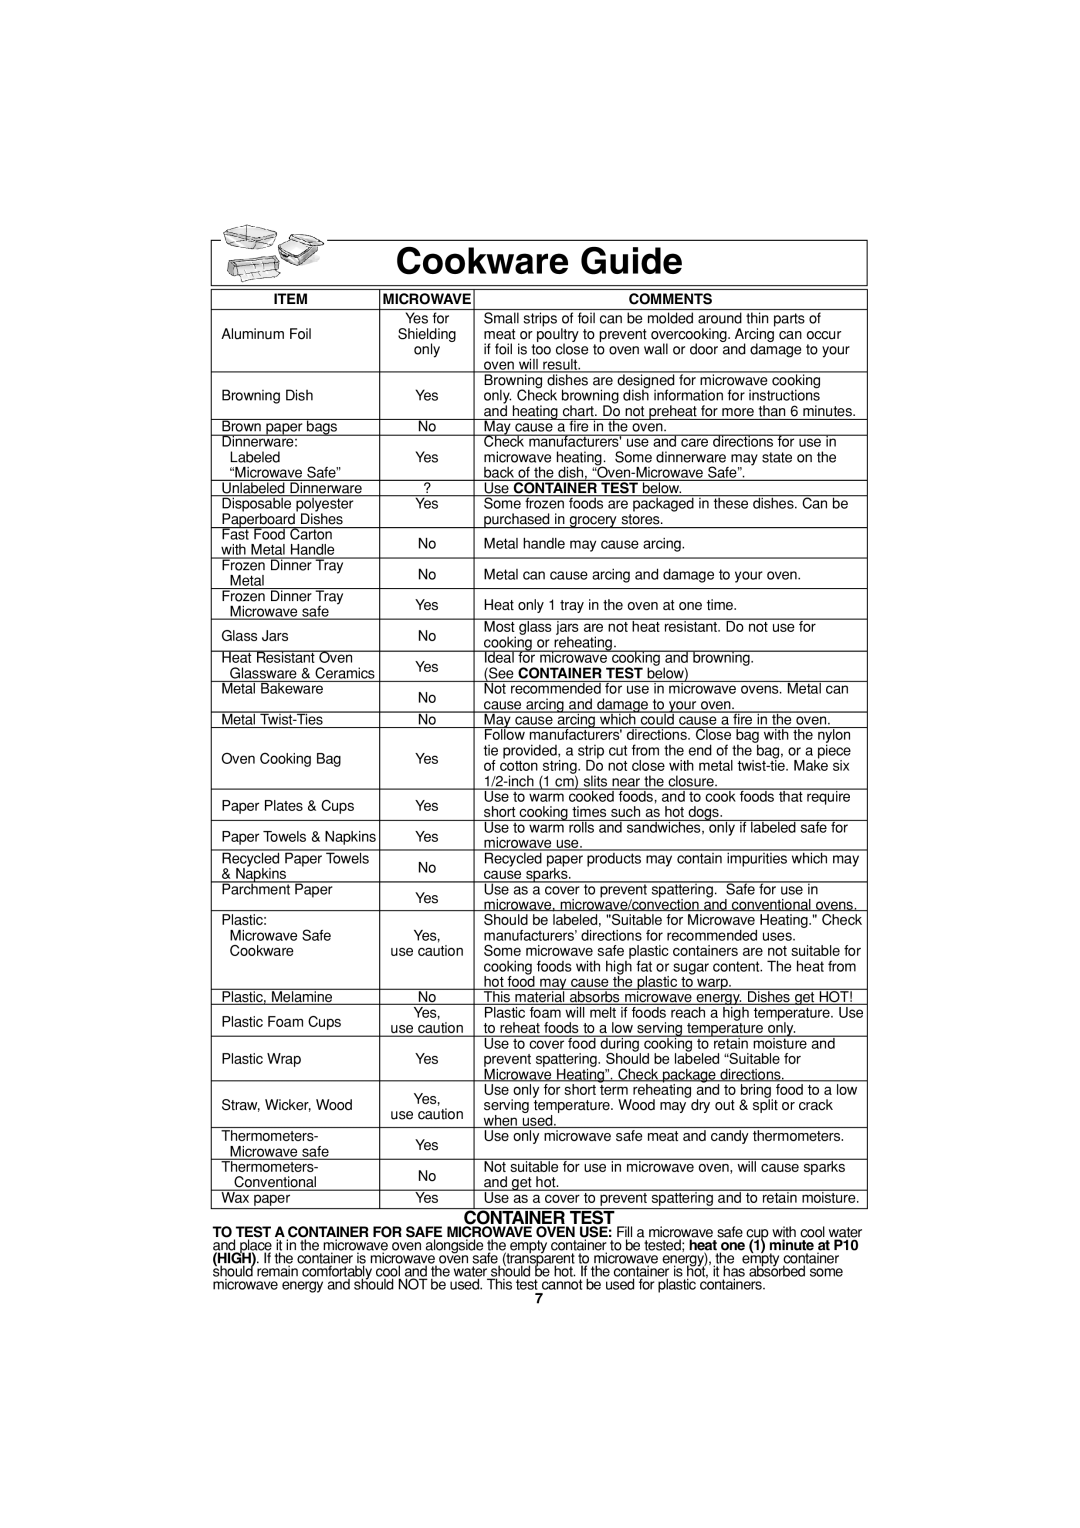 Panasonic NN-S743, NN-S943, NN-S533 important safety instructions Cookware Guide, Container Test 